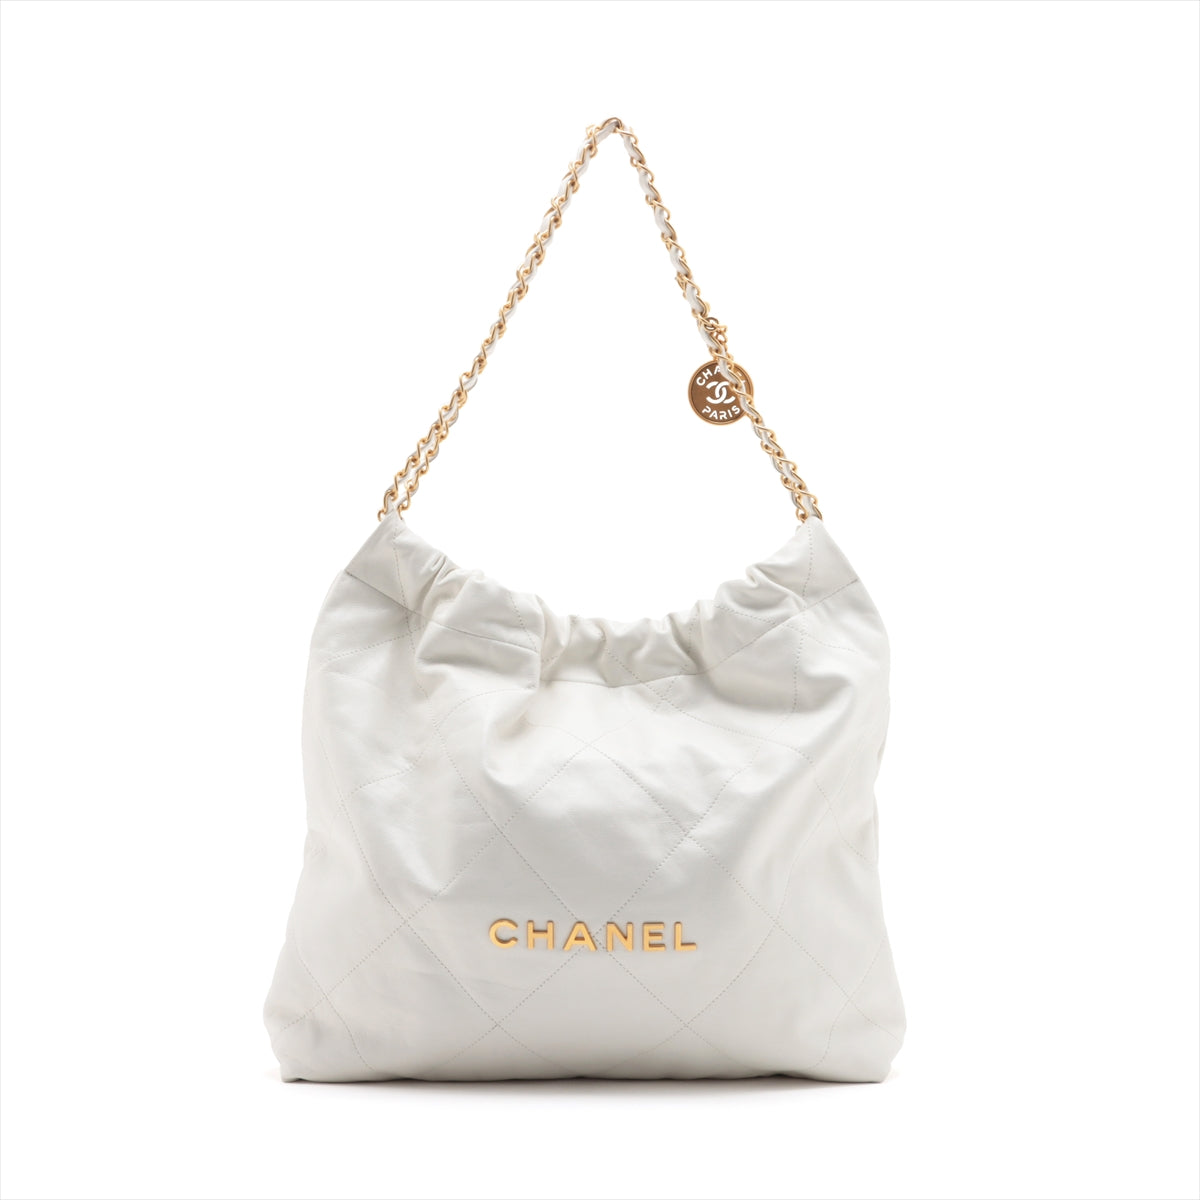 Chanel Chanel 22 Leather Chain Shoulder Bag White Gold Metal Fittings